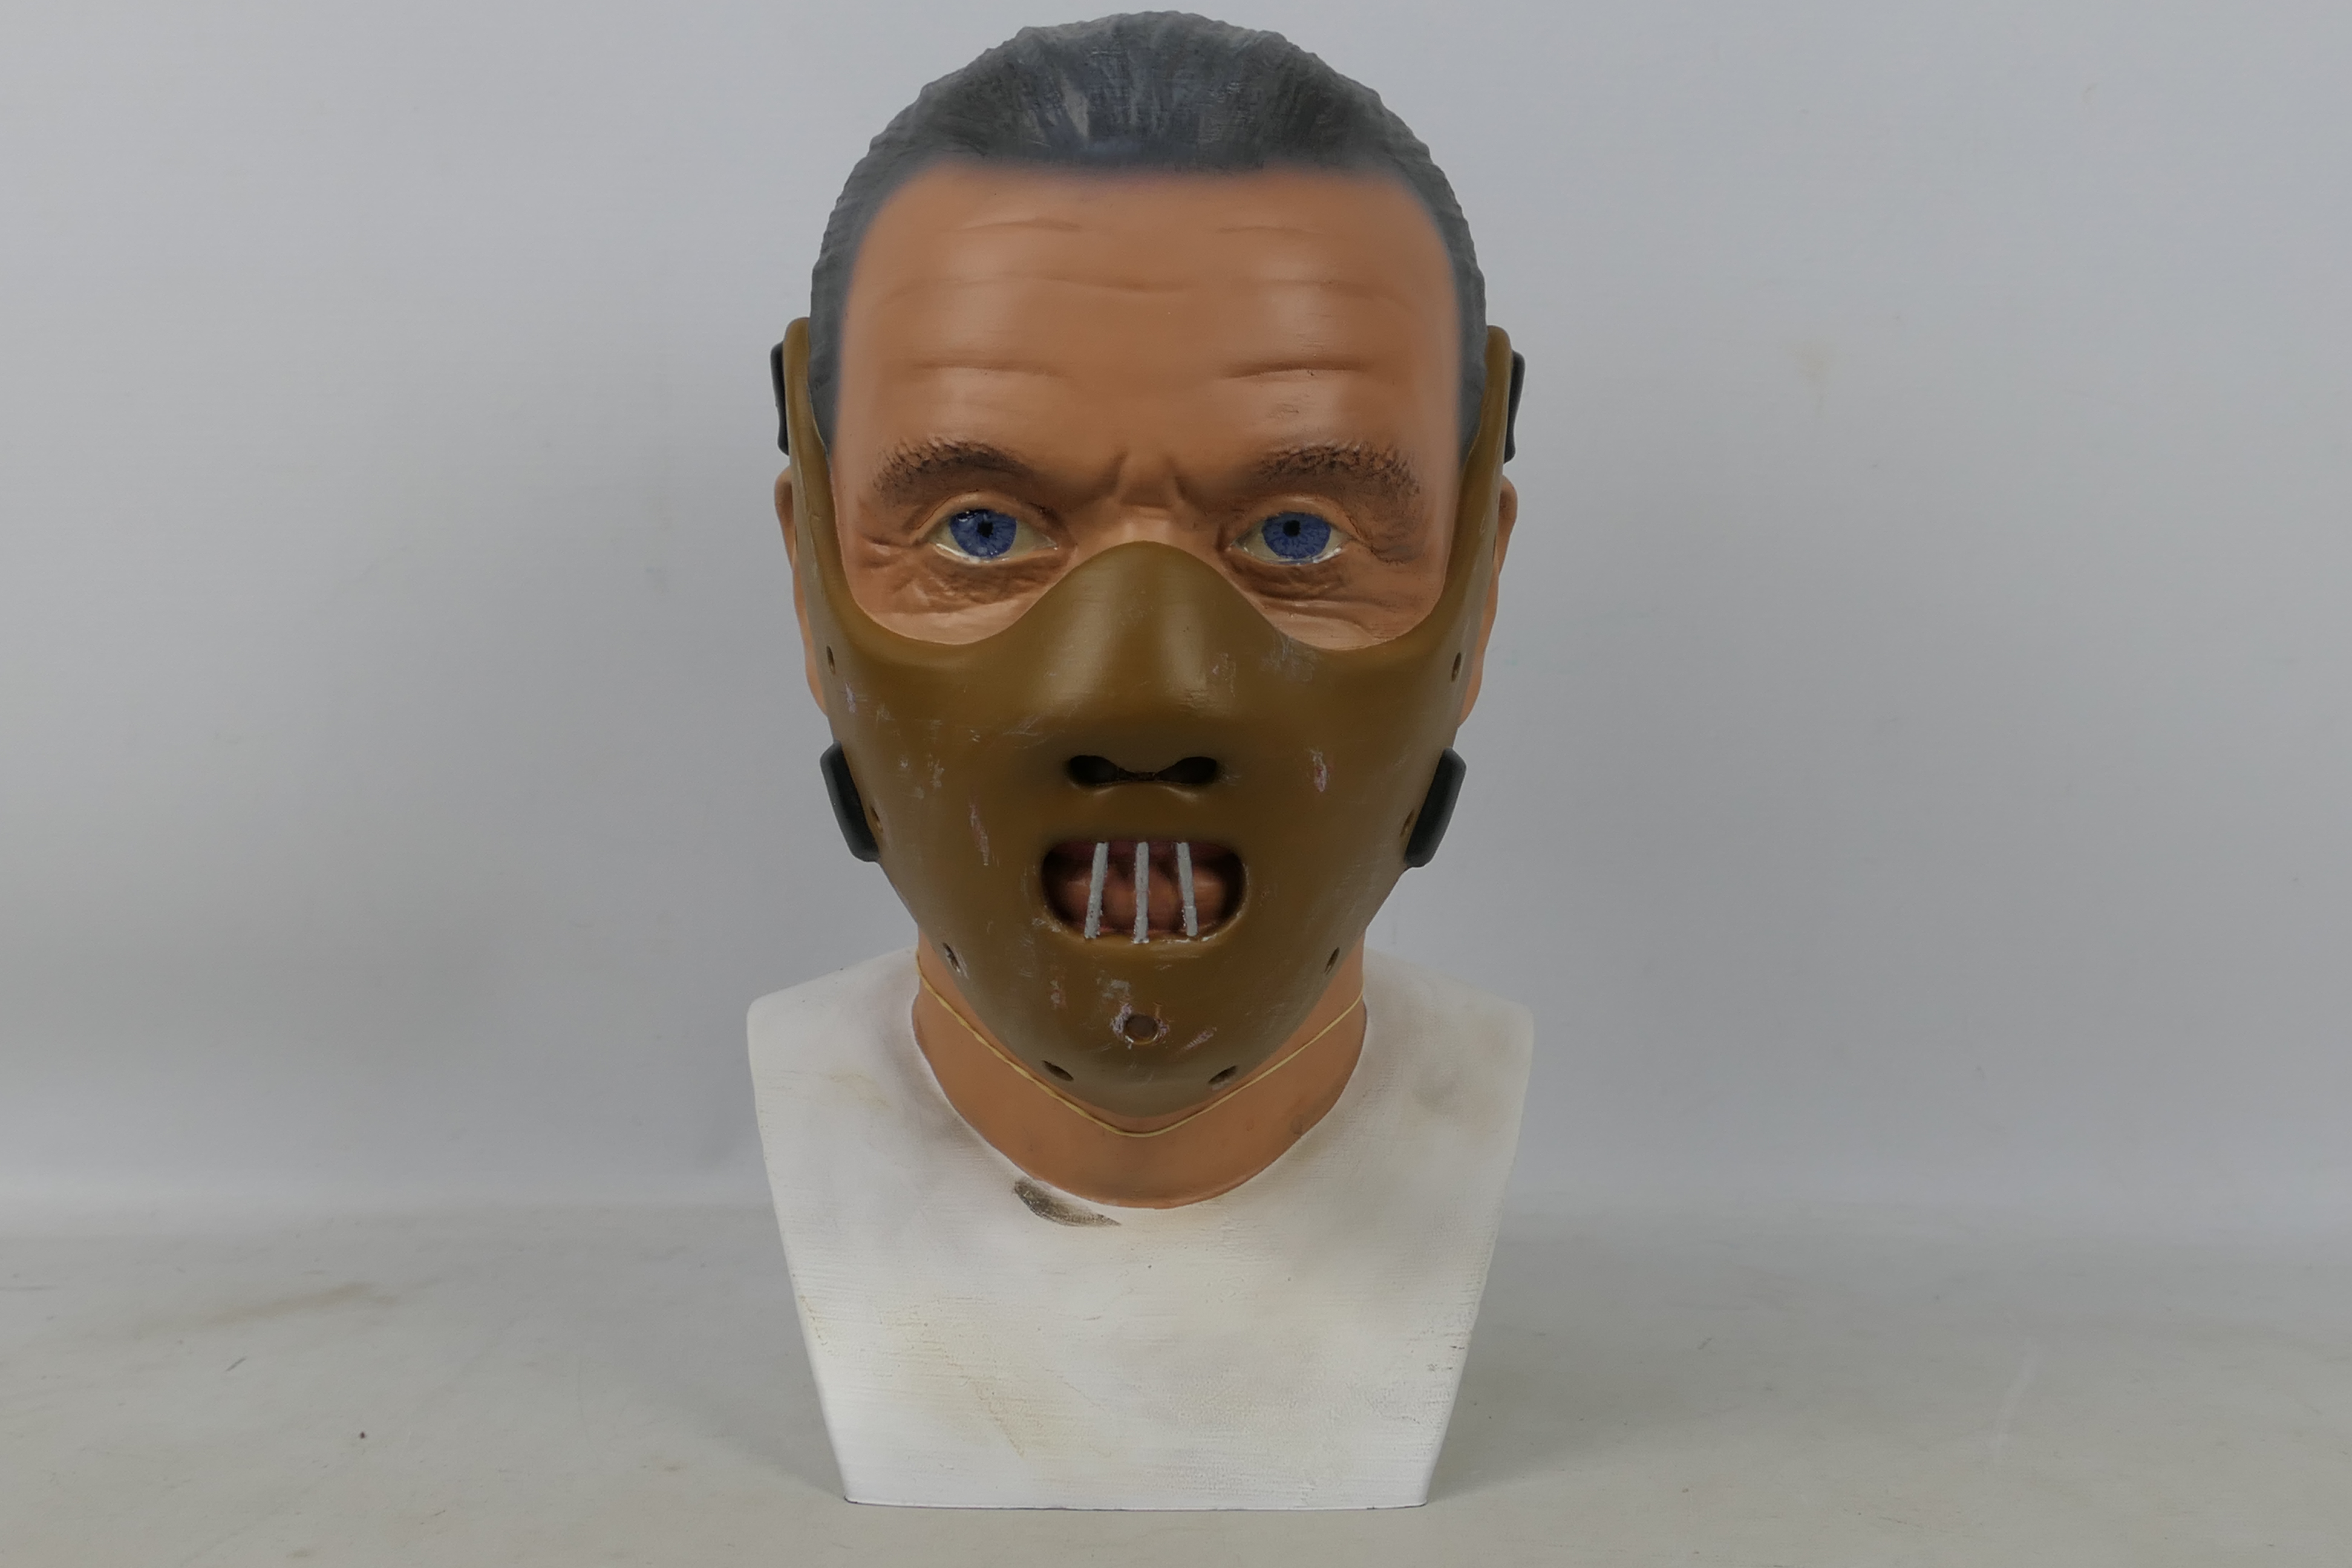 Unknown Maker - Hannibal Lecter - A life size Hannibal Lecter head which appears in Good condition - Image 2 of 4